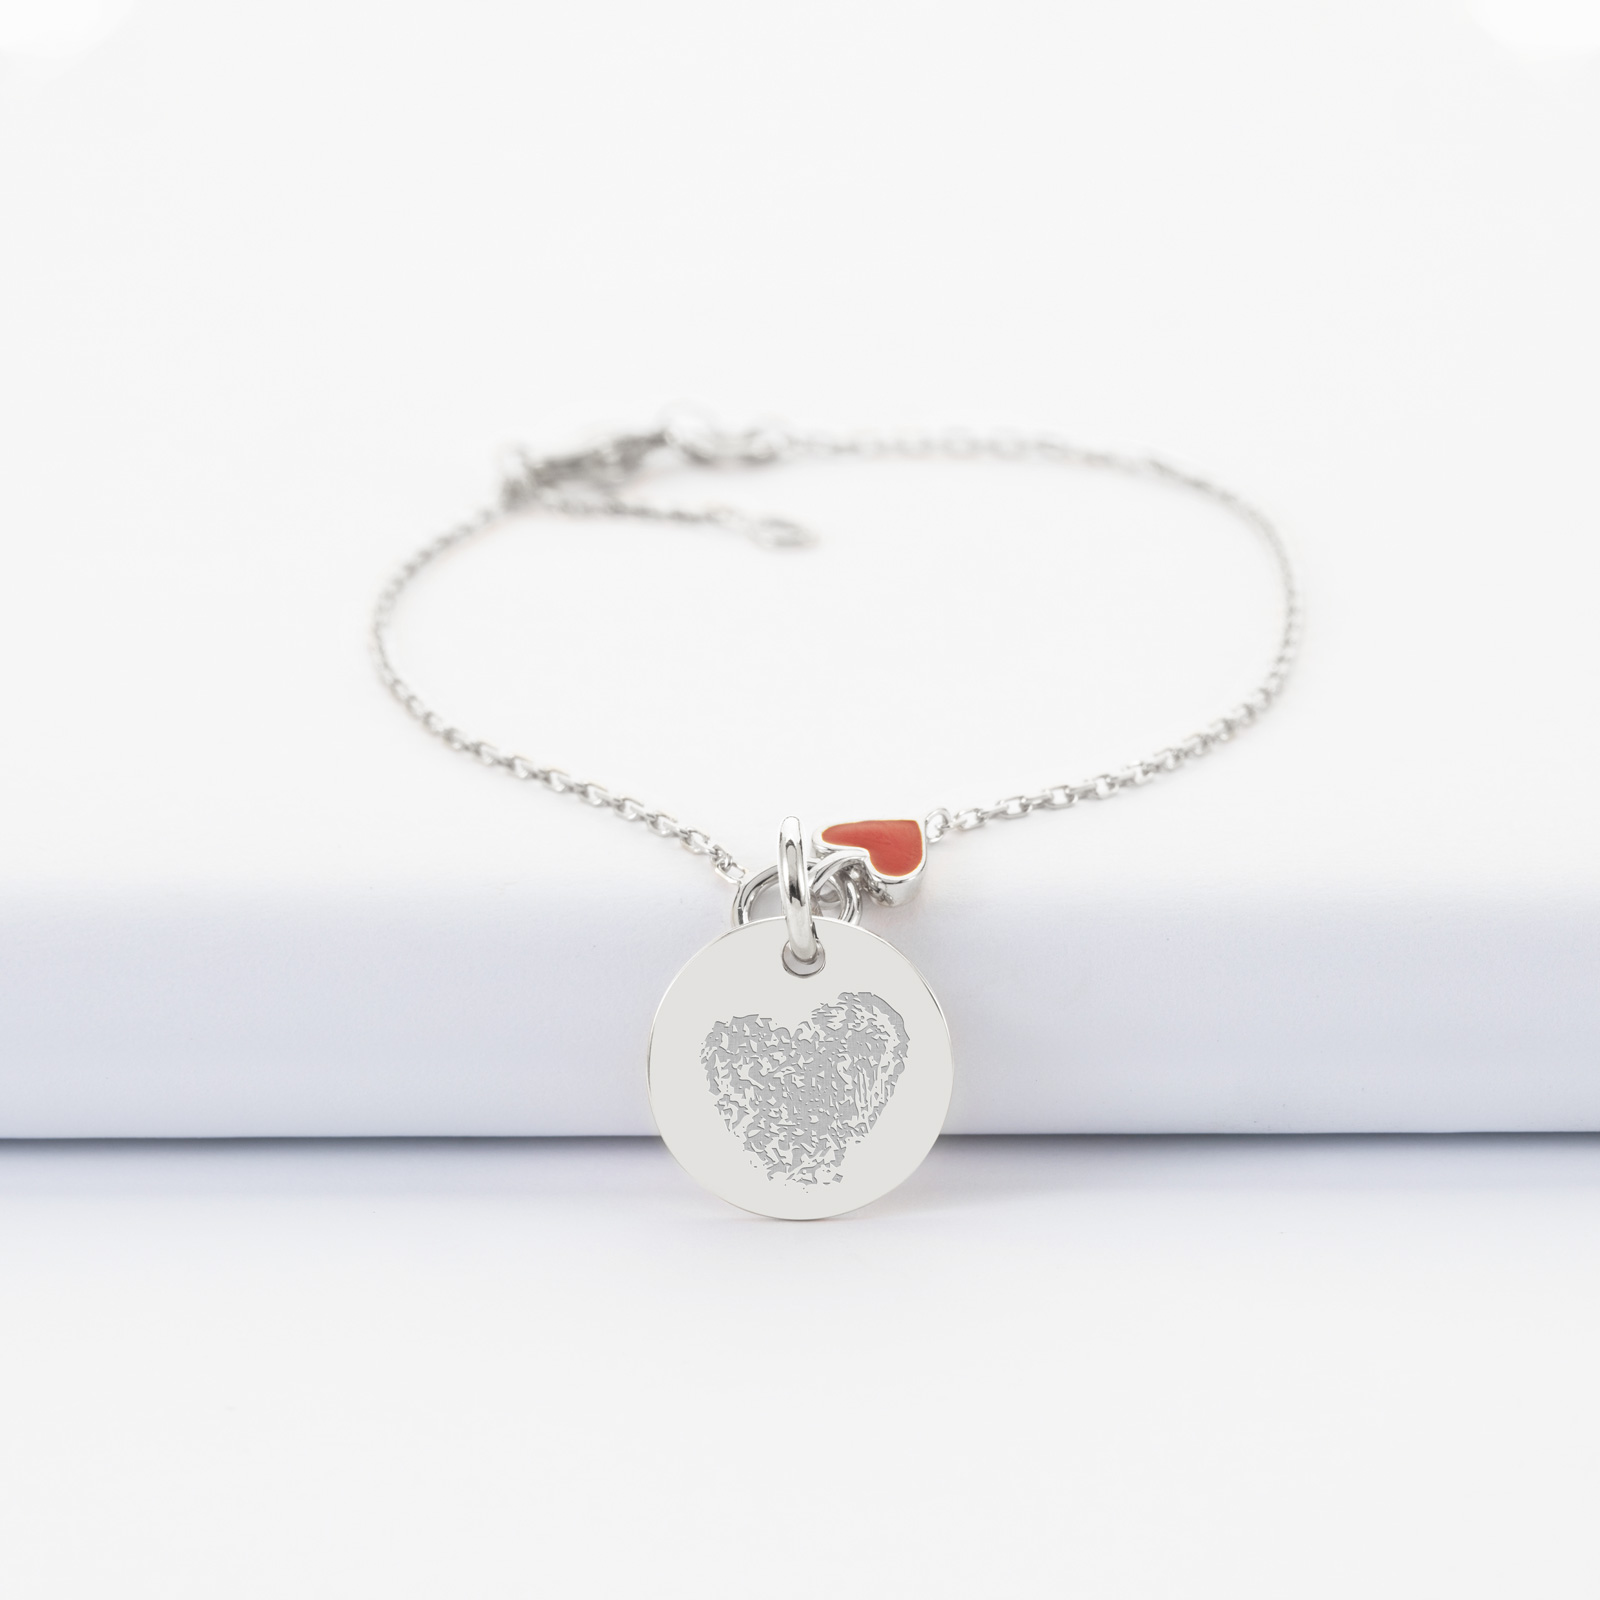 Personalised Silver Cable Link Bracelet With Heart Pendant